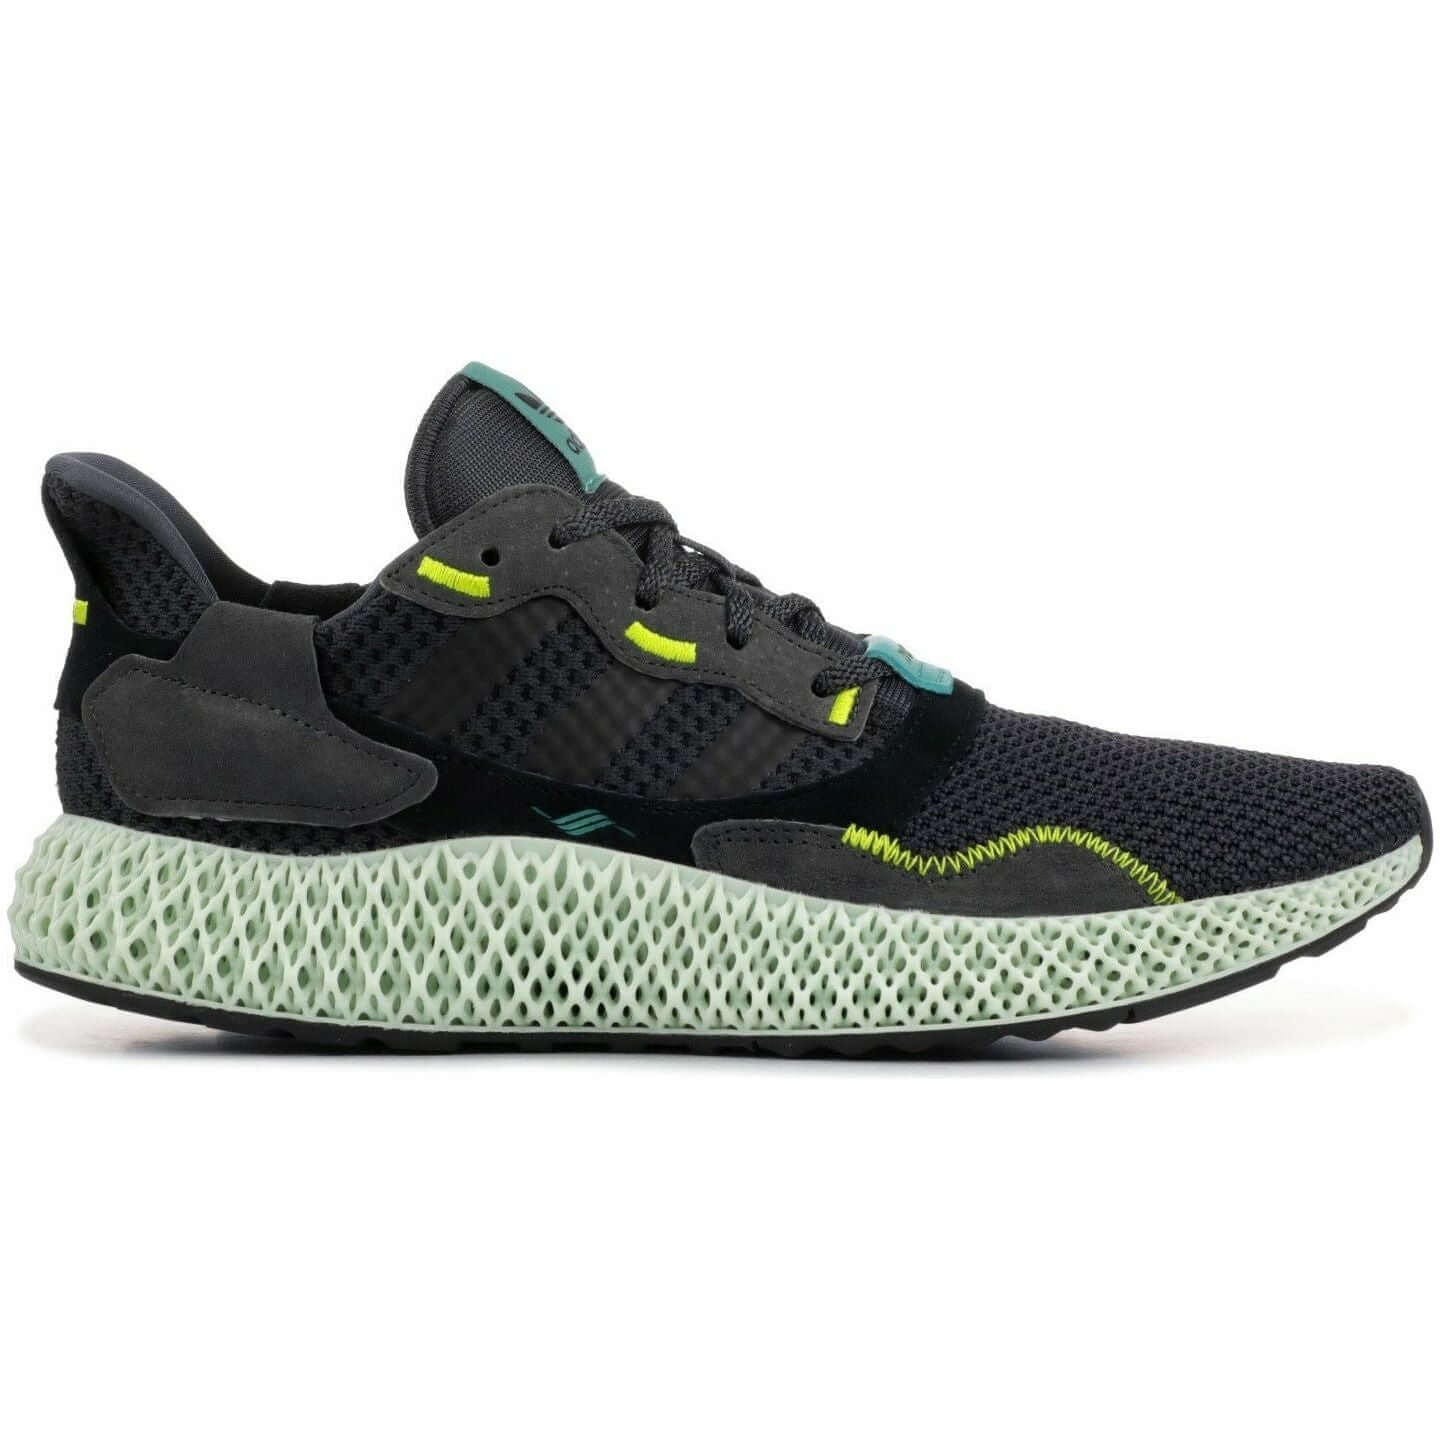 Adidas ZX 4000 4D Carbon from Adidas